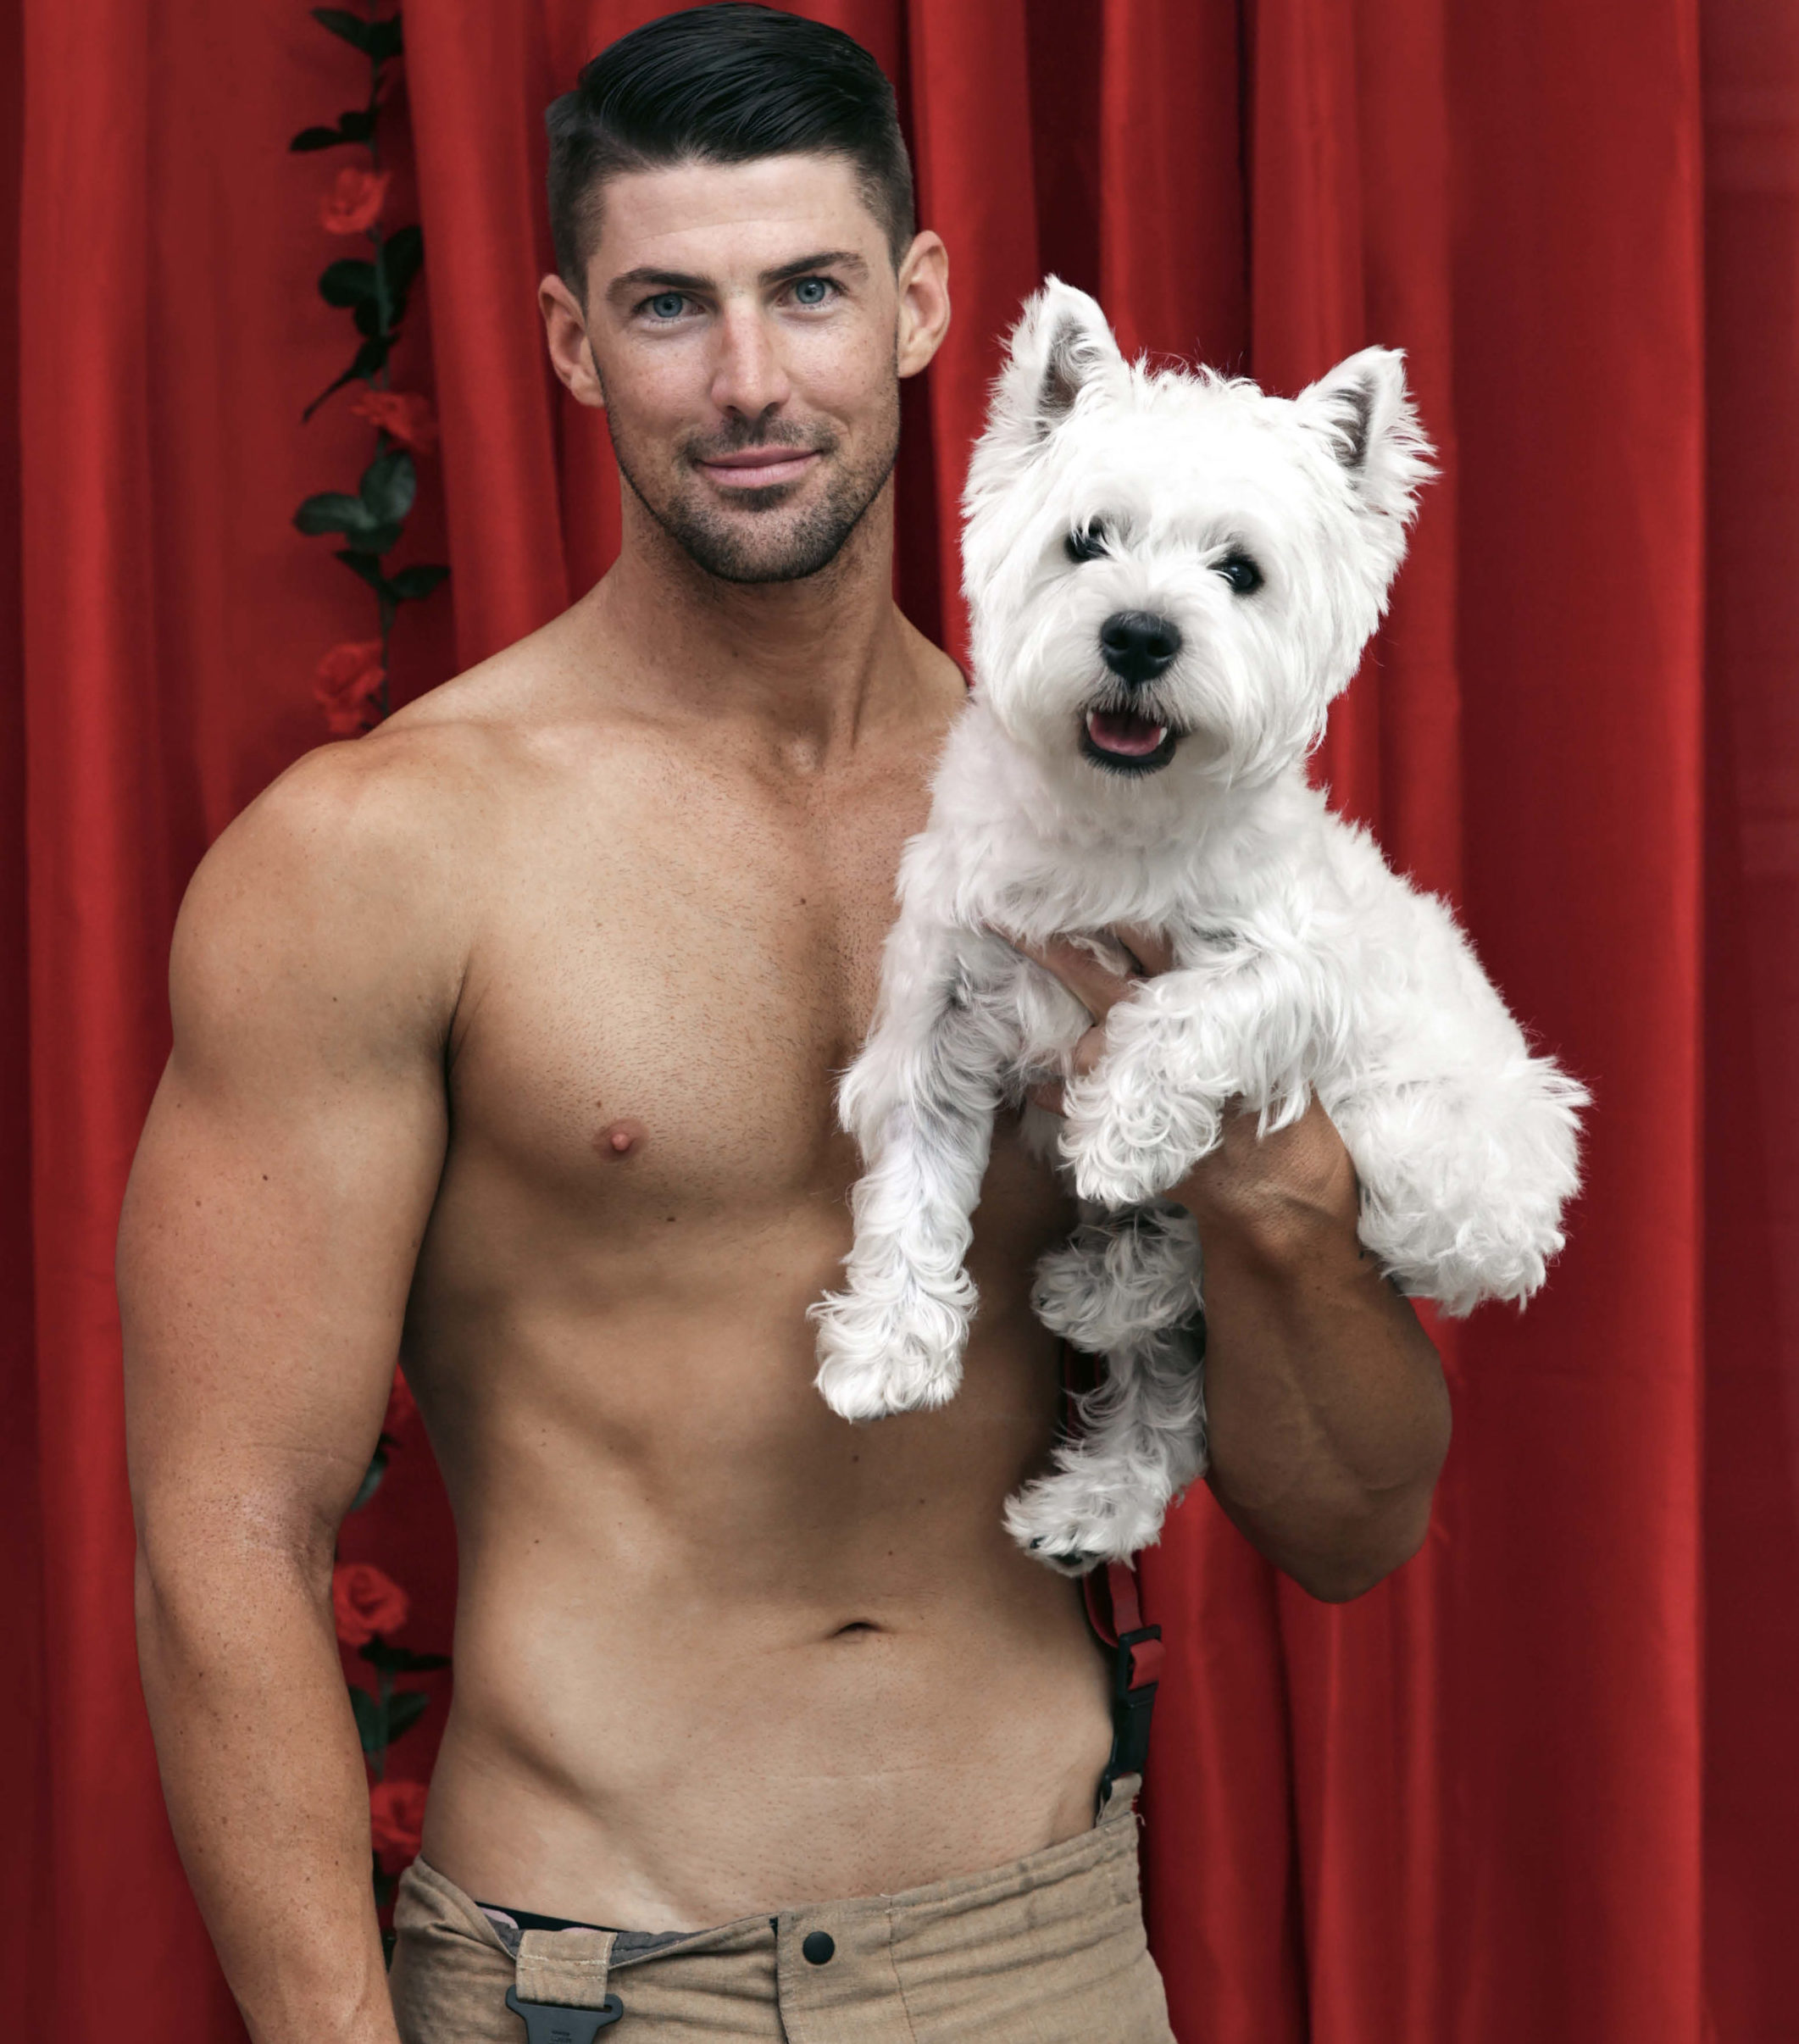 australian-firefighters-calendar-celebrates-30-years-of-supporting-charities-pet-age